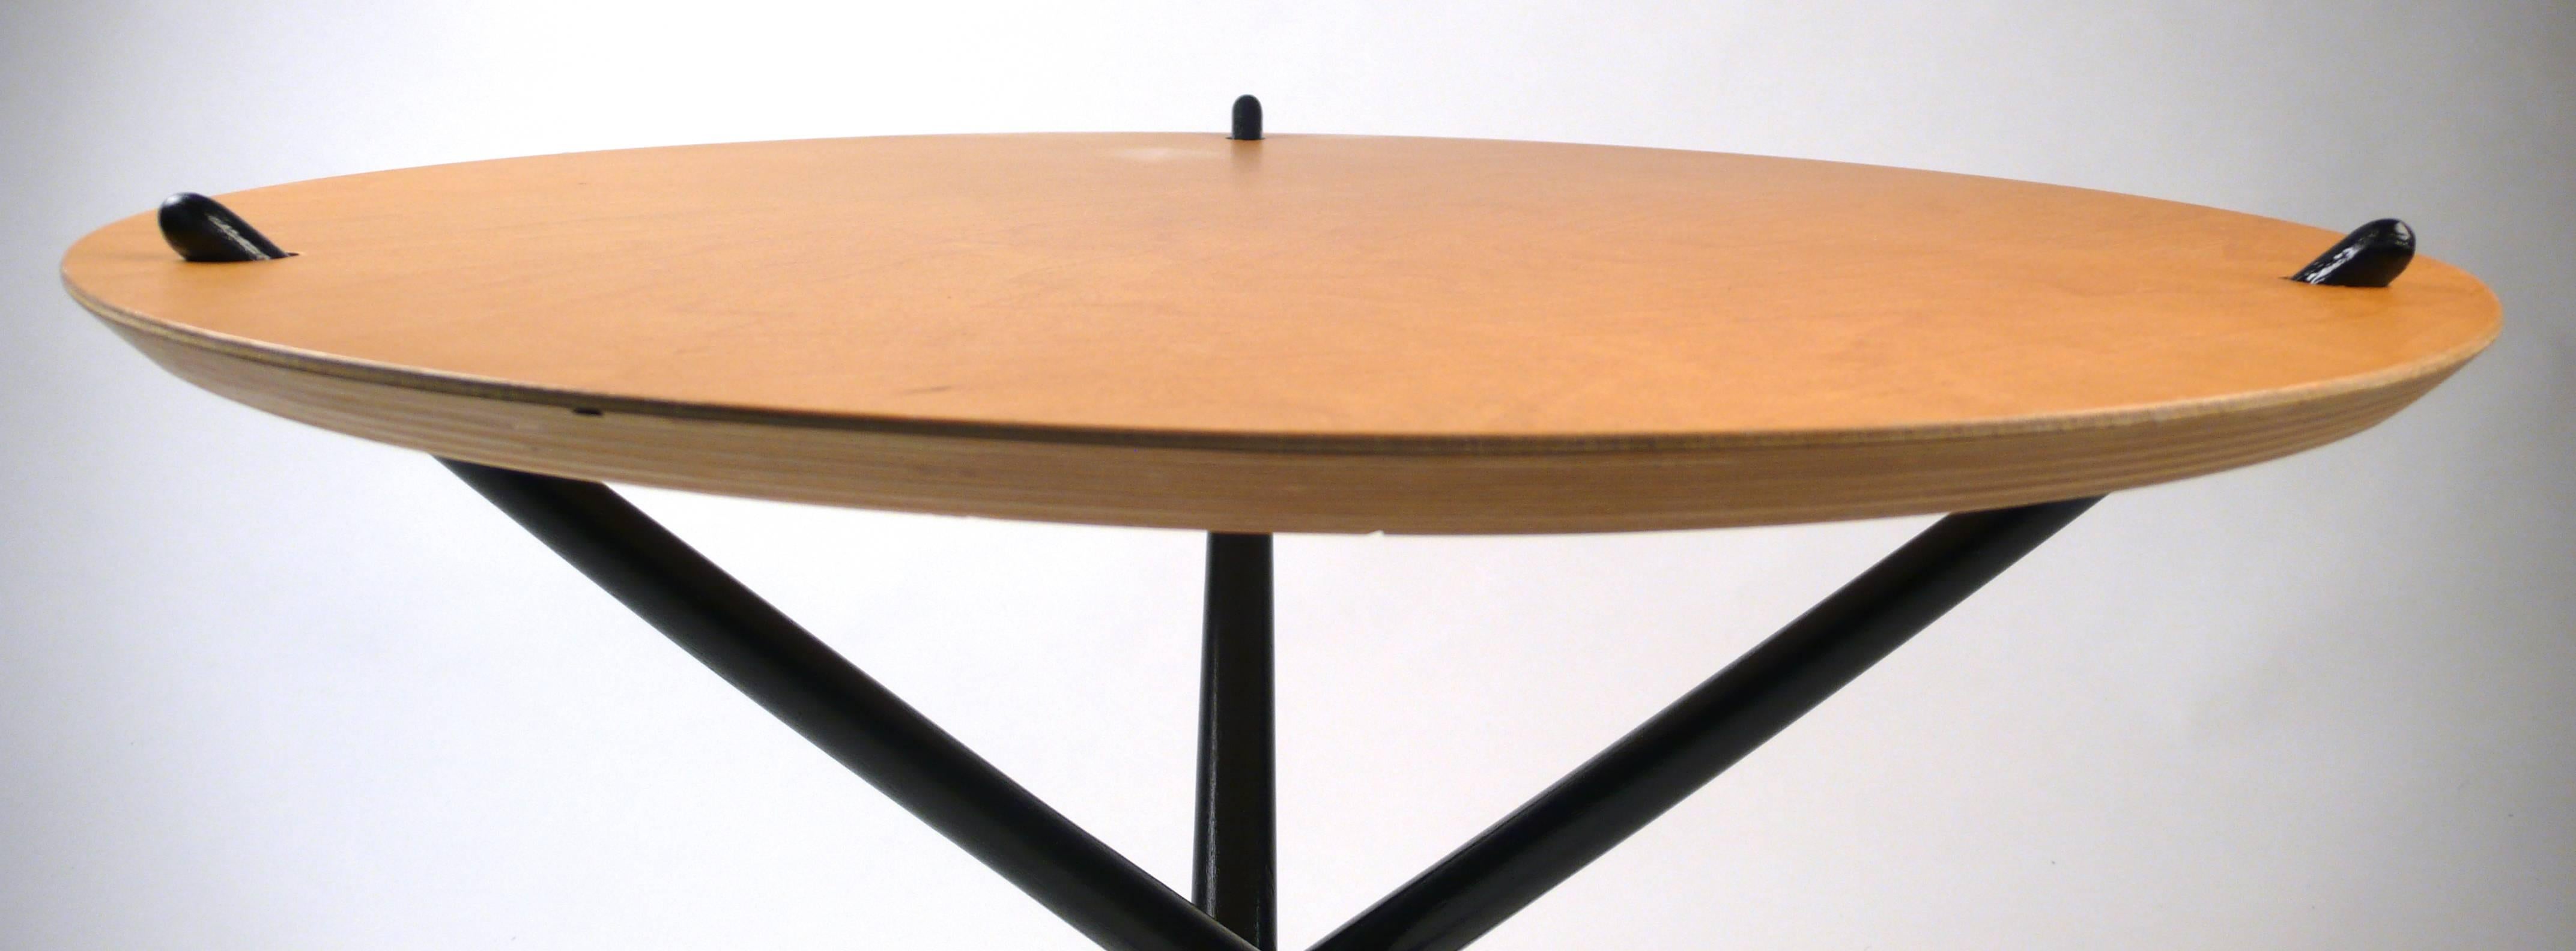 American Knoll Tripod Tables 1948 black and wood